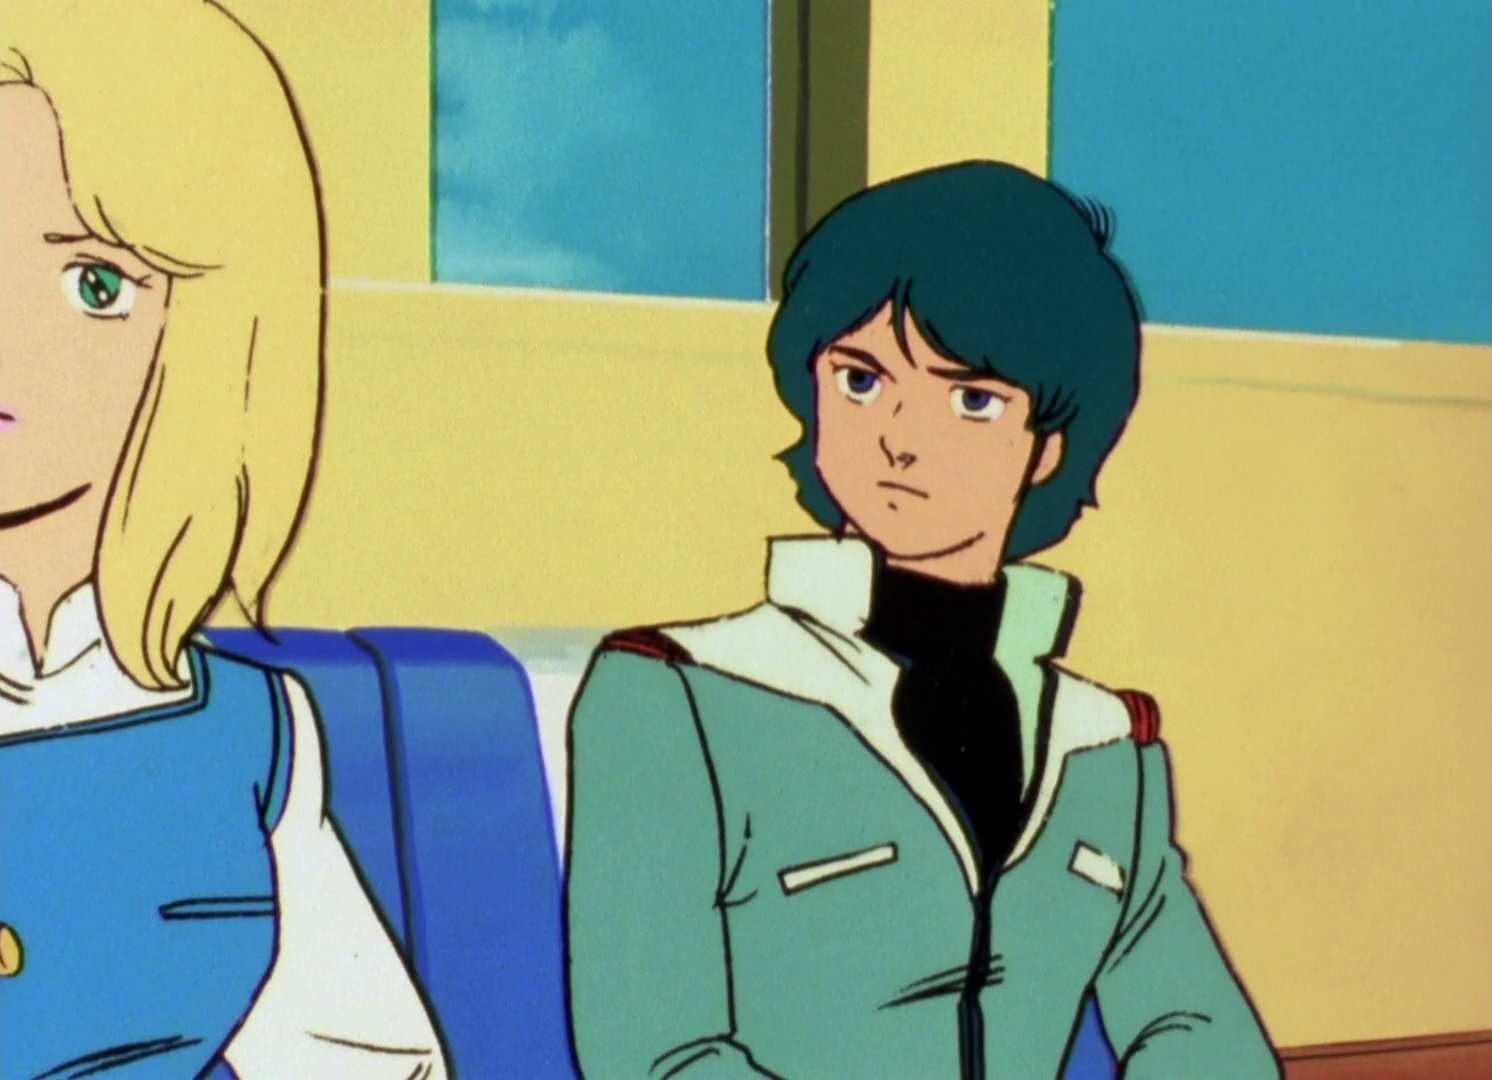 Kamille staring completely dead-eyed.